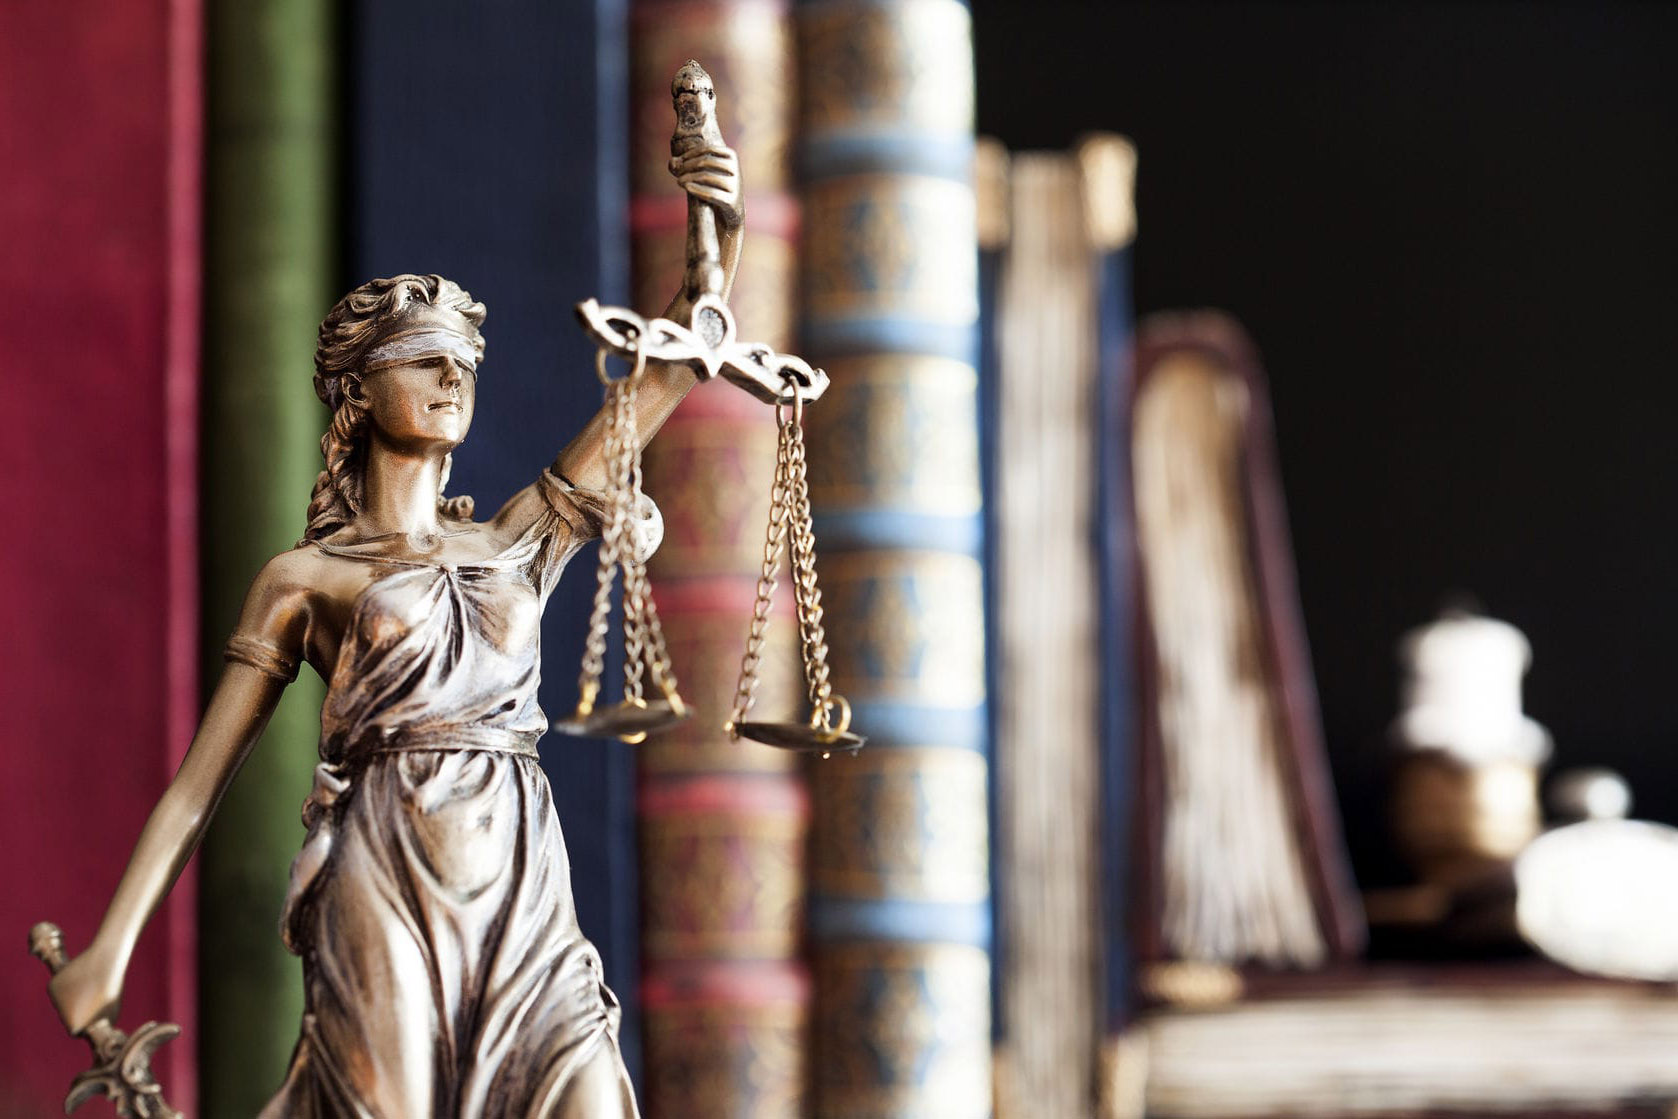 Photographic Image of blindfolded statue holding balanced scales representing justice